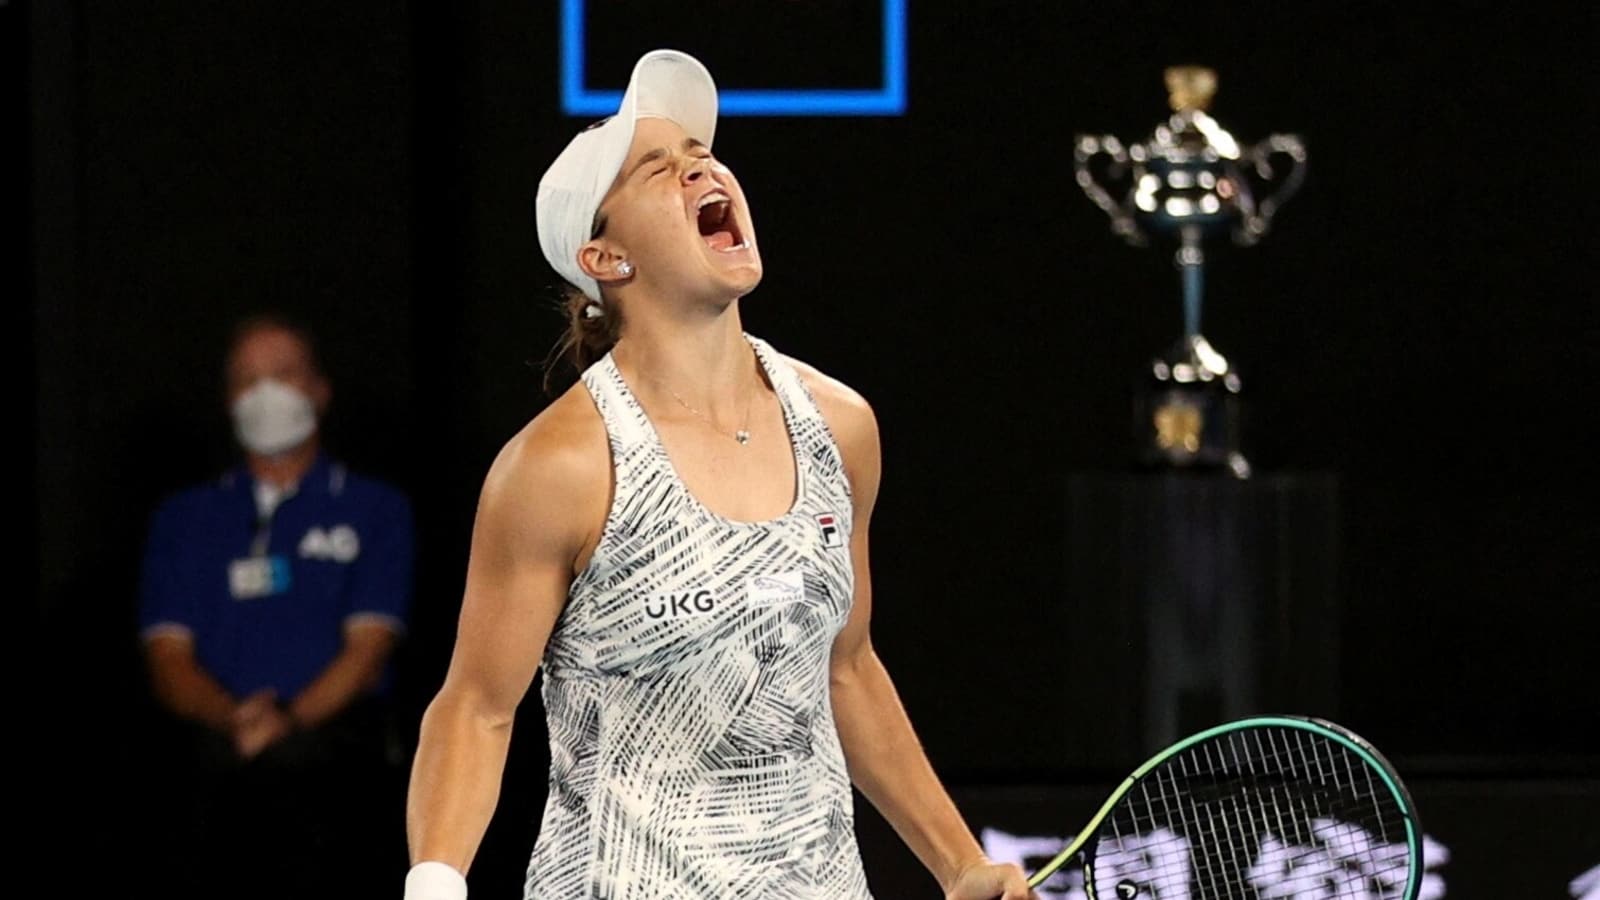 Winning the Australian Open 2022, Barty ended the host country's 44-year wait